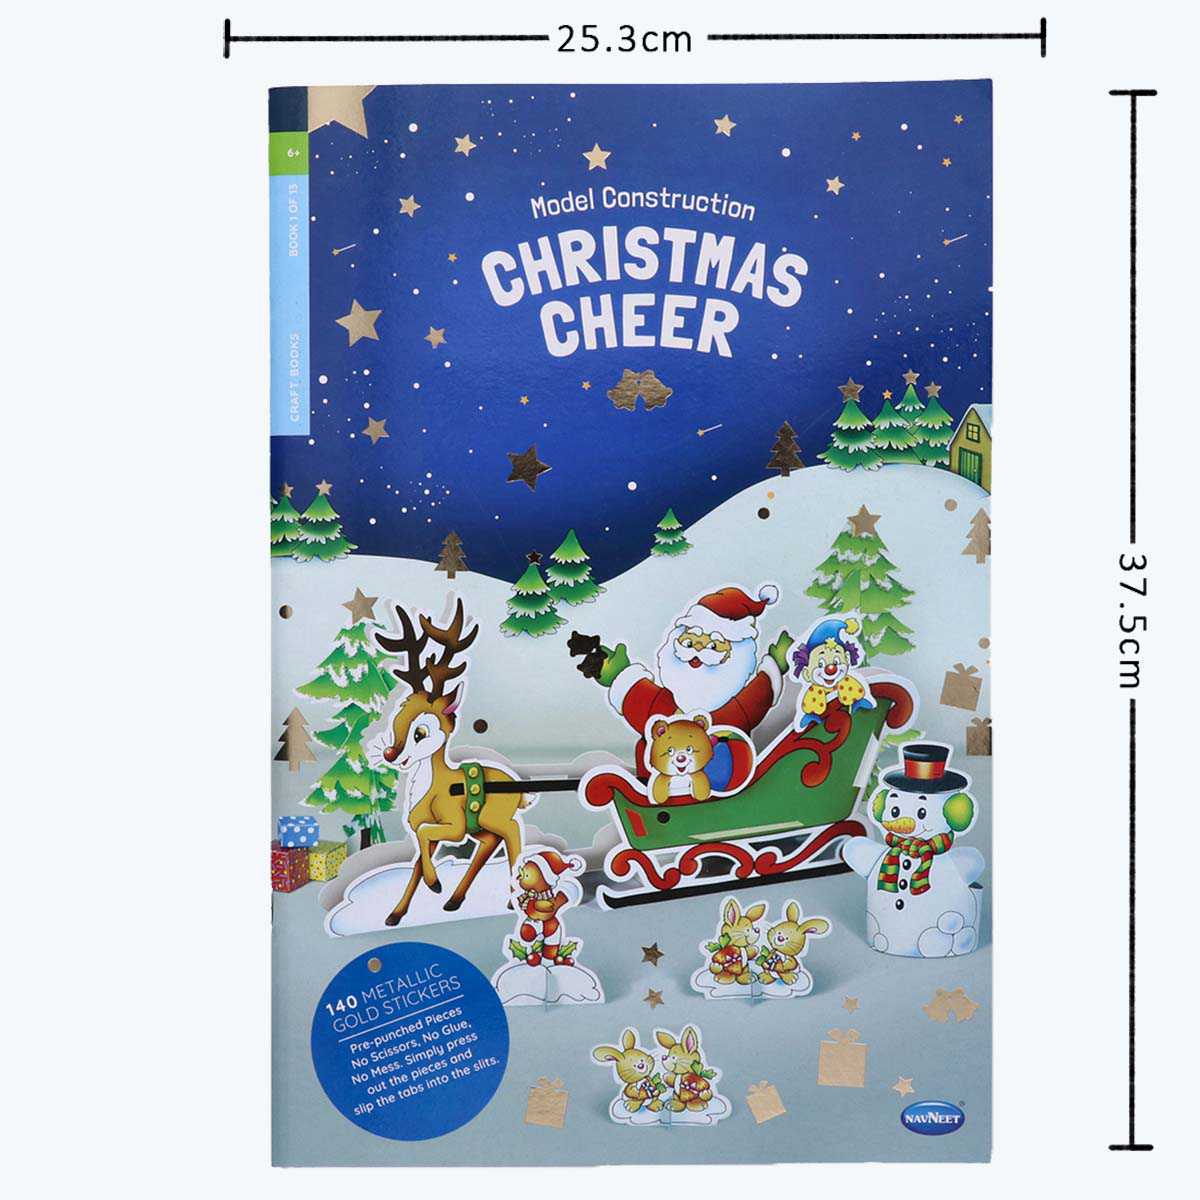 Navneet Model Construction Christmas Cheer Book - Stem learning - 3D Paper Models for kids - DIY Crafts - Best Christmas Gift -Mess Free activities - No Scissors & Glue